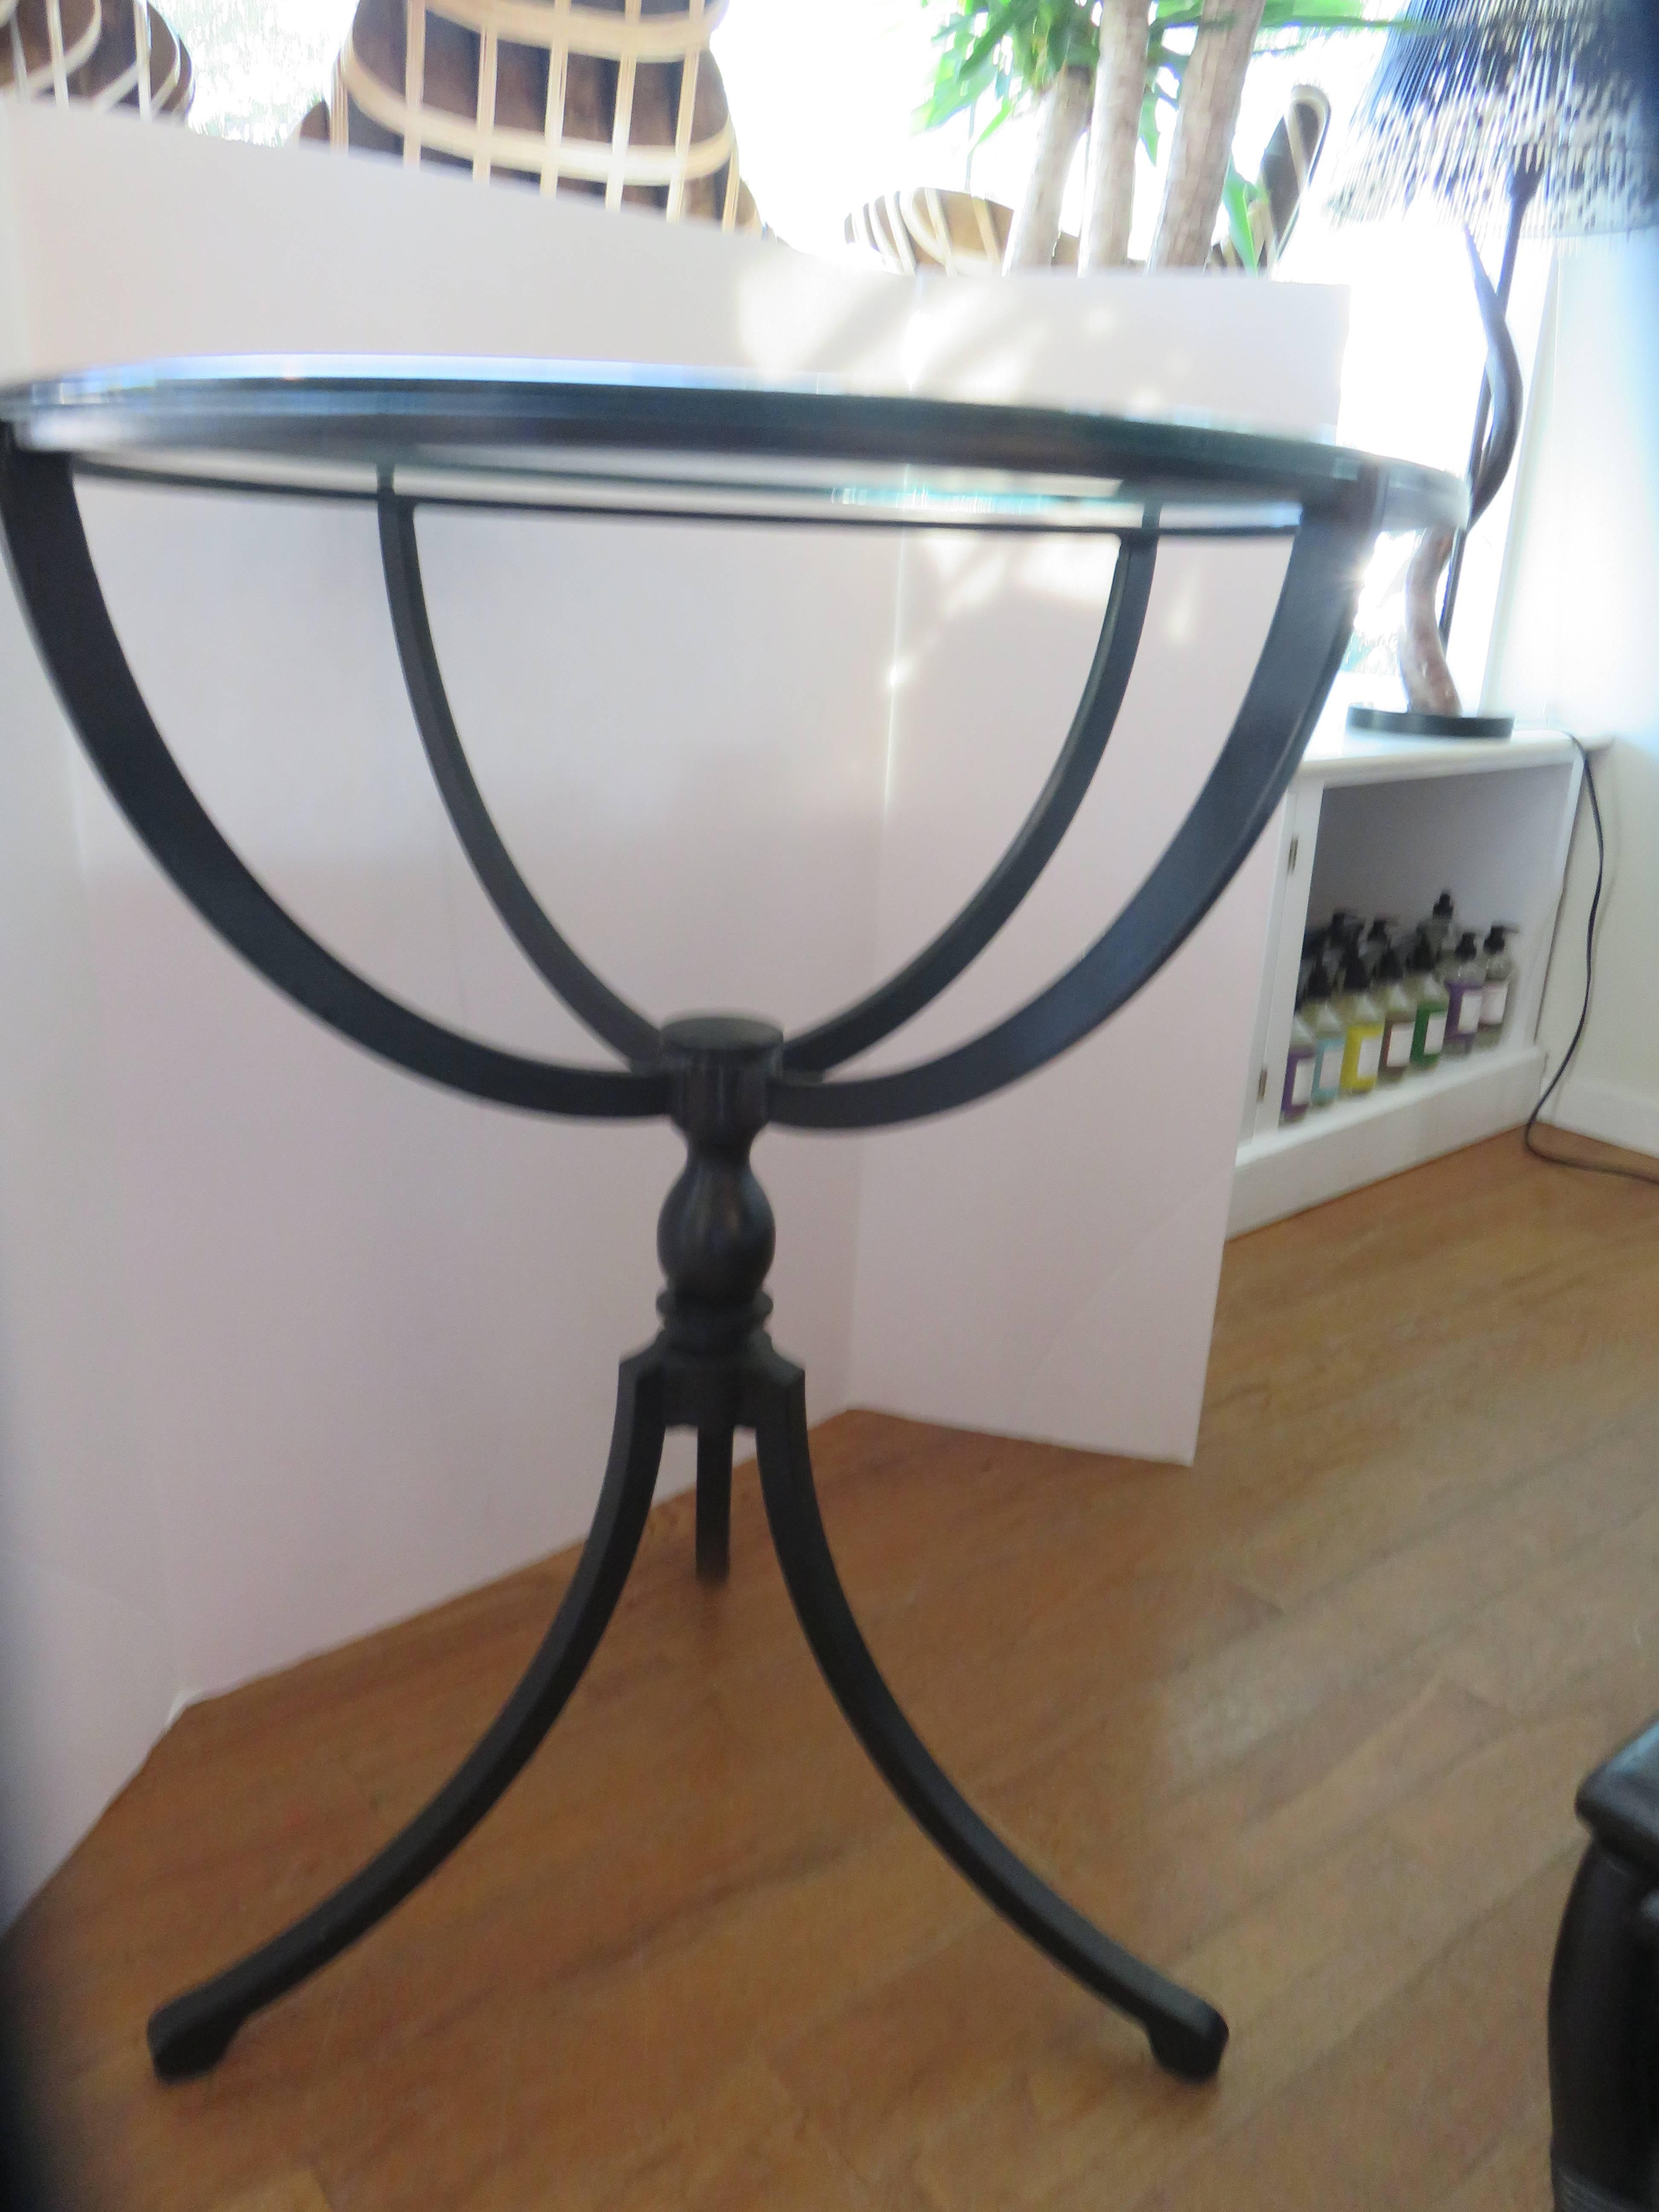 Hand-forged Gueridon form black iron table. Thick beveled edge glass top.
Period Greek Revival.